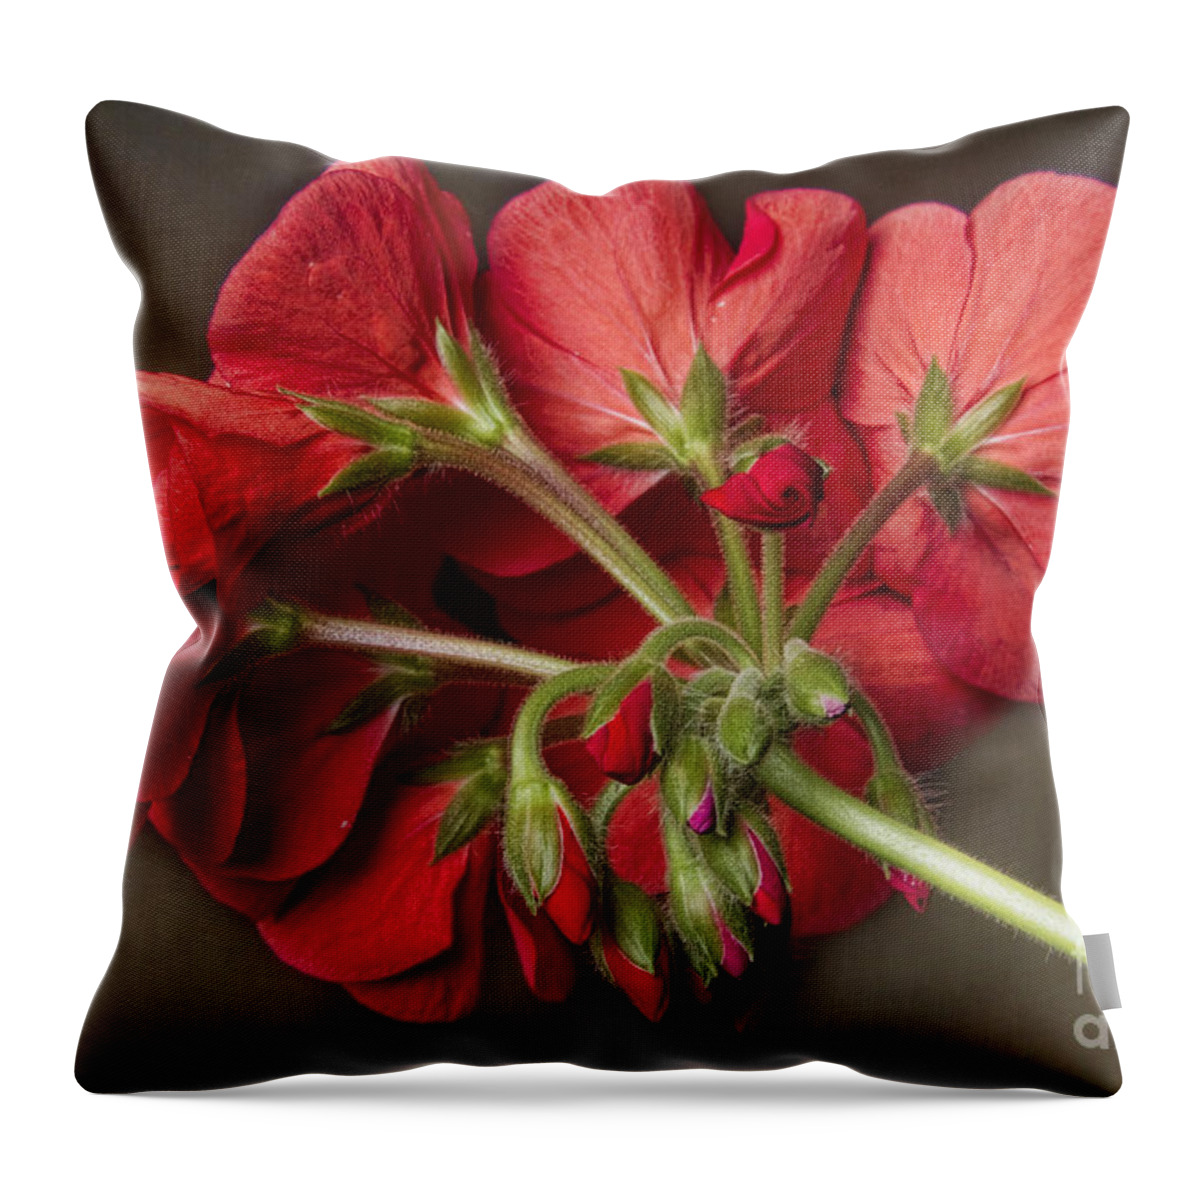 Red Geranium Throw Pillow featuring the photograph Red Geranium In Progress by James BO Insogna